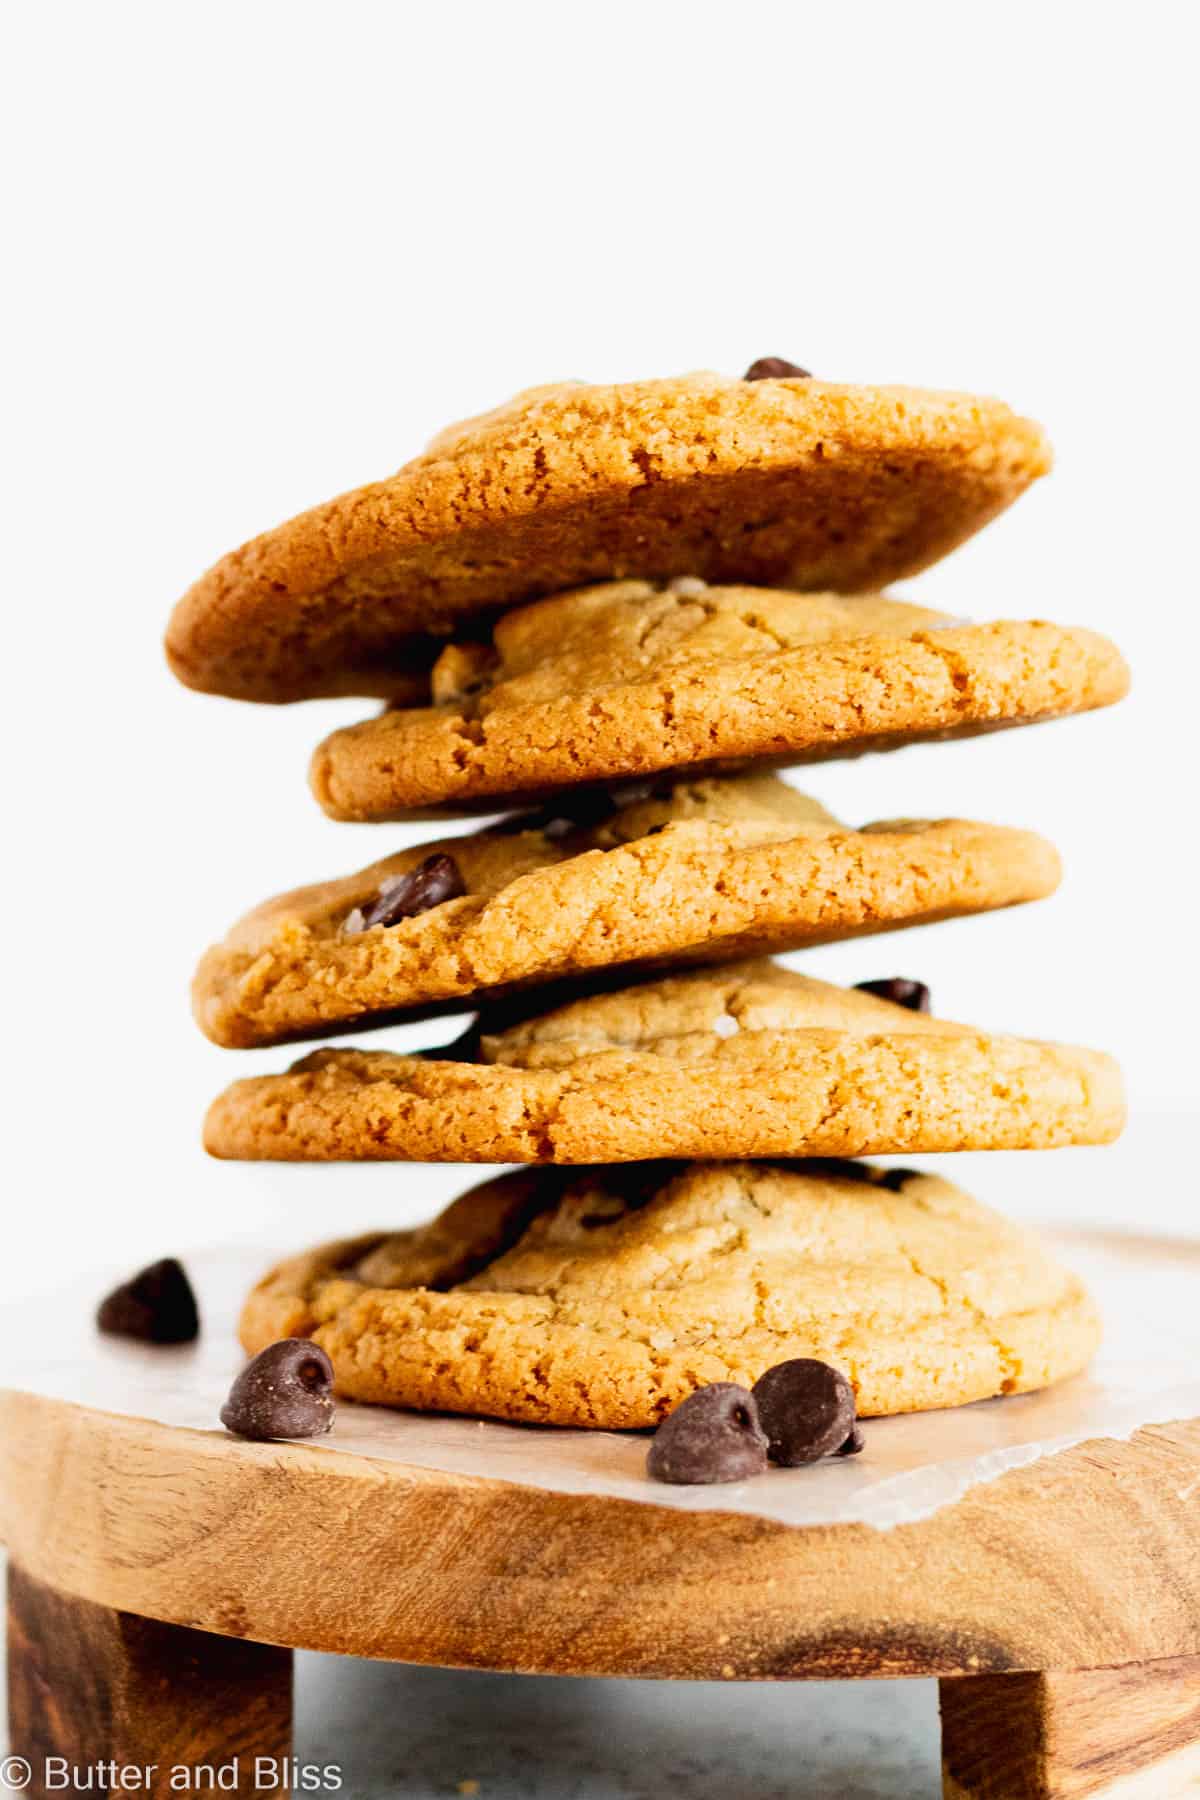 A stack of bakery-style cookies on a small wood platter.